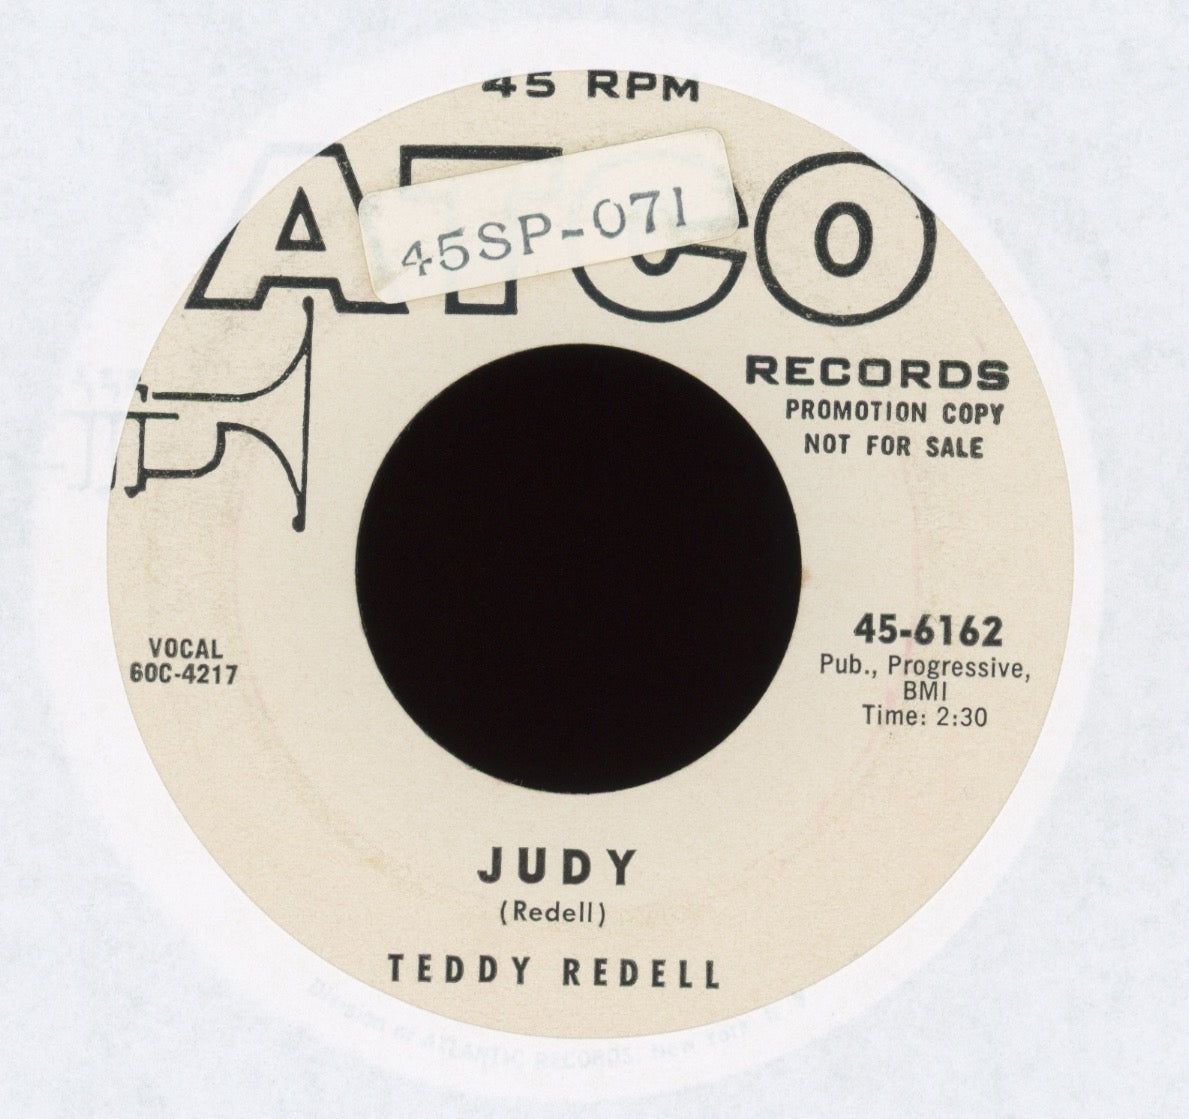 Teddy Redell - Judy on Atco Promo